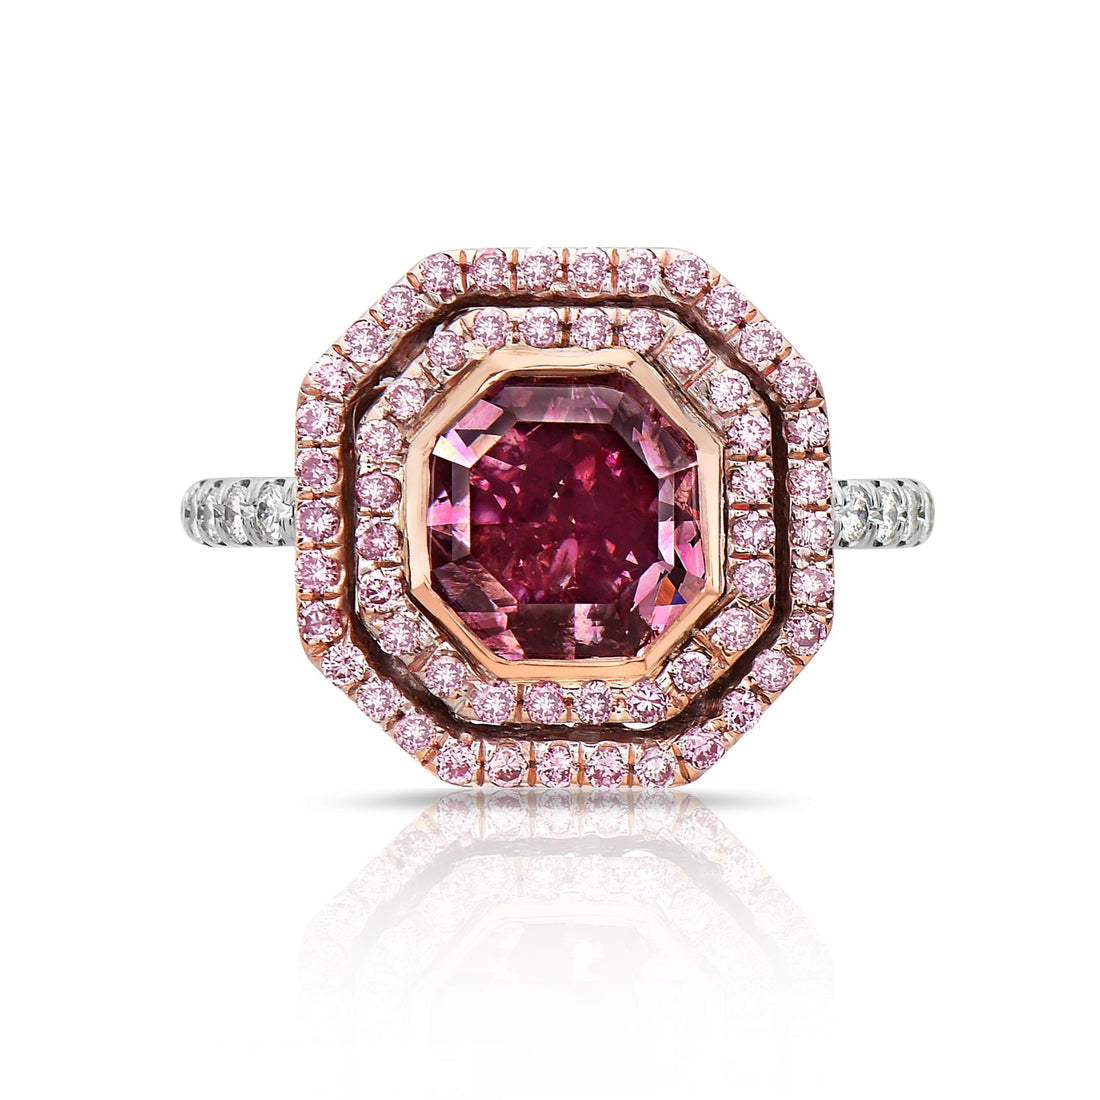 Levels of Color: Natural Pink Diamonds